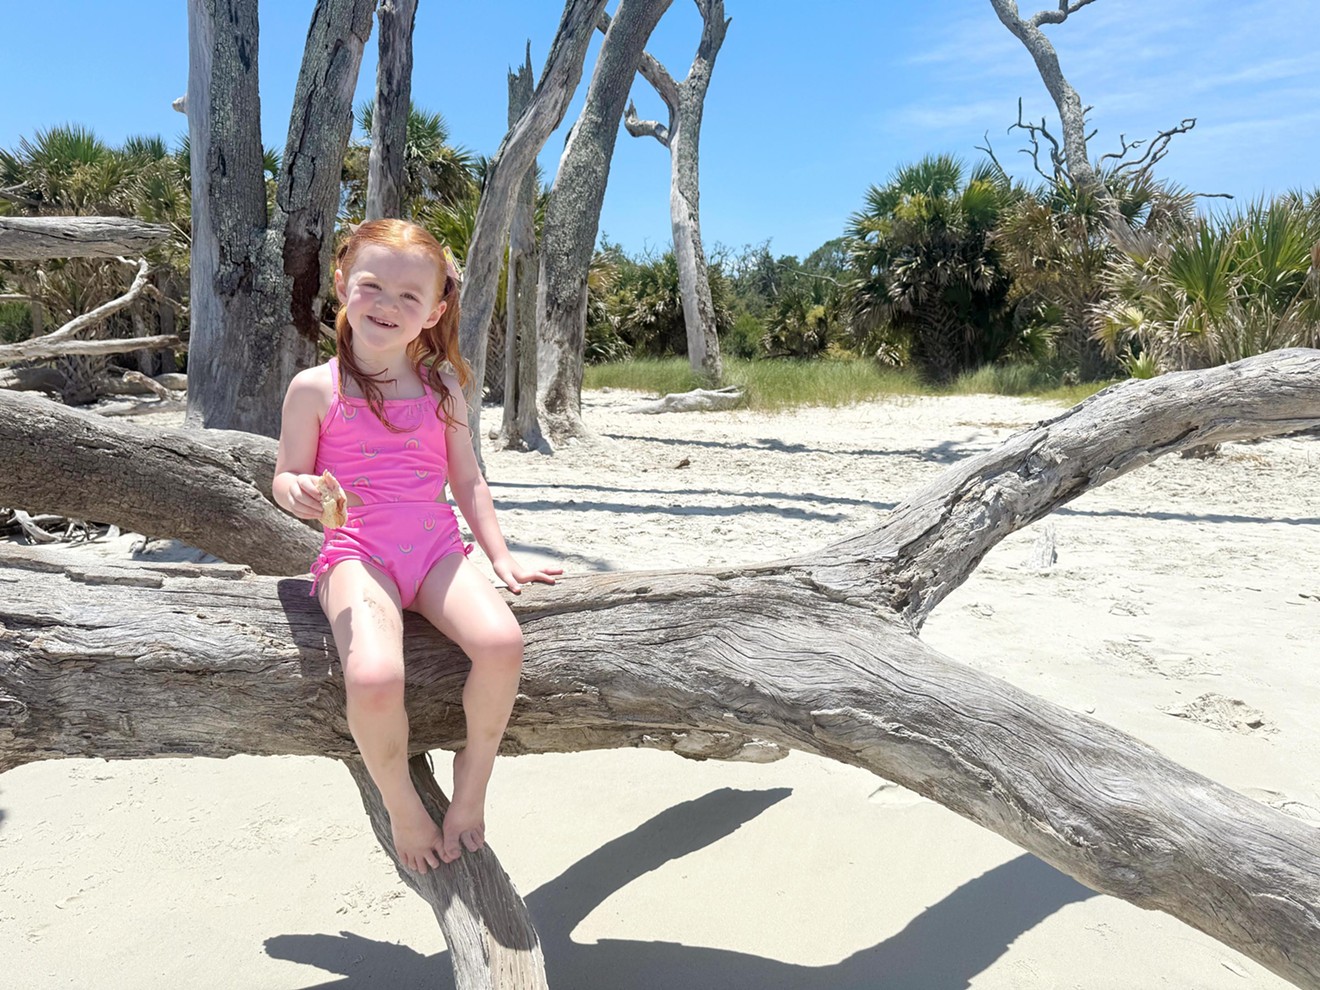 Adventure Awaits! Local Excursions for Your Tiniest Explorers | Community | Savannah News, Events, Restaurants, Music